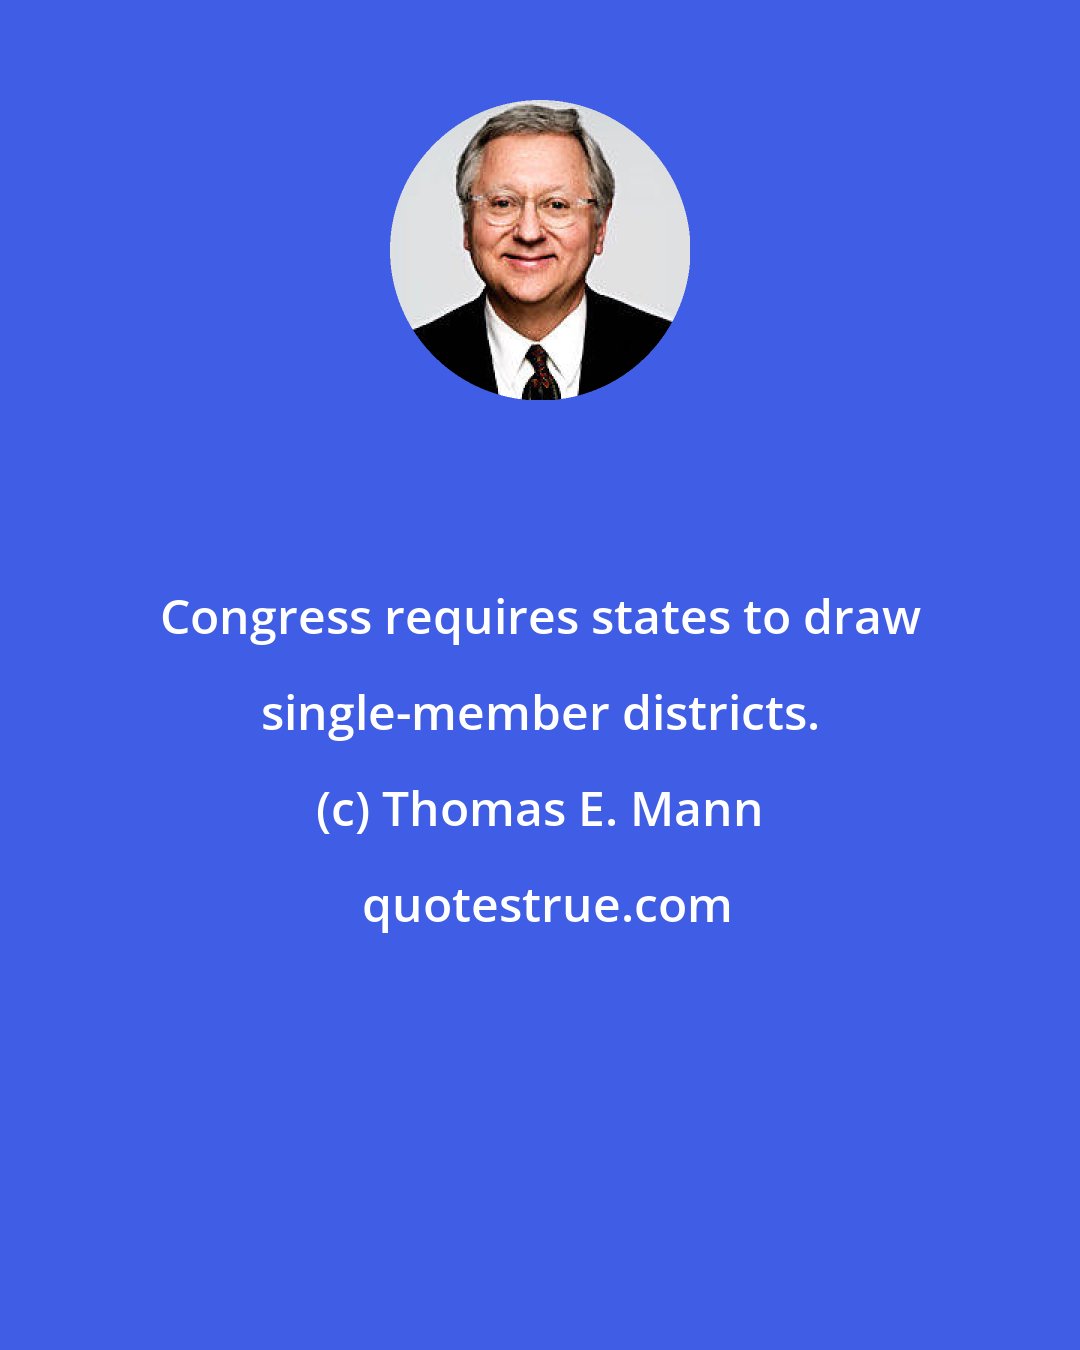 Thomas E. Mann: Congress requires states to draw single-member districts.